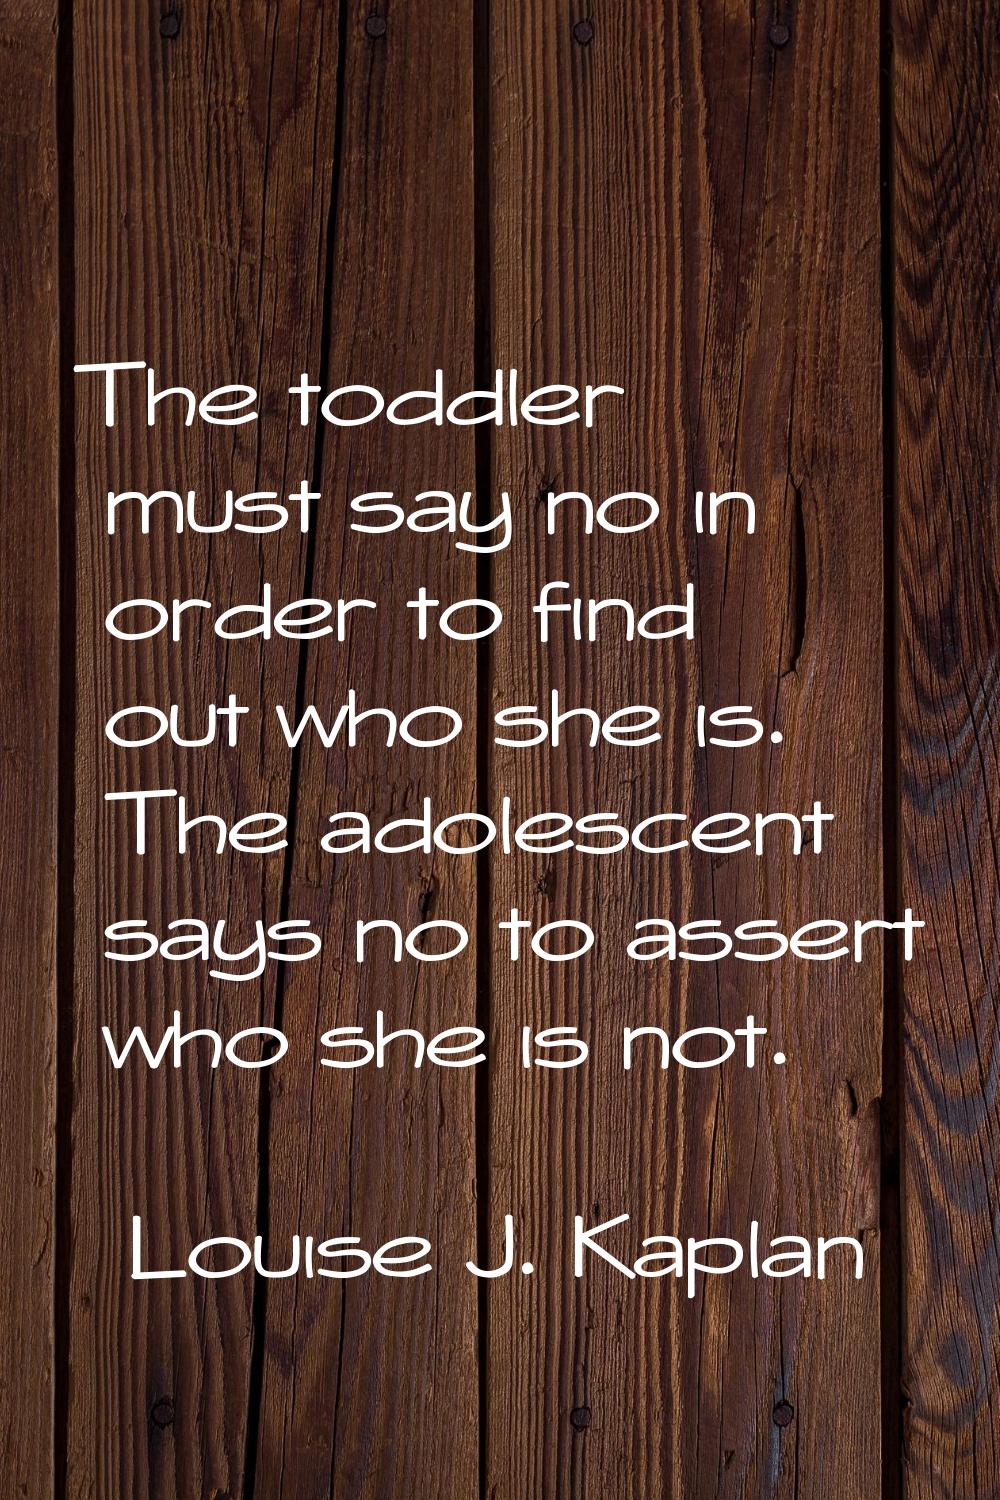 The toddler must say no in order to find out who she is. The adolescent says no to assert who she i